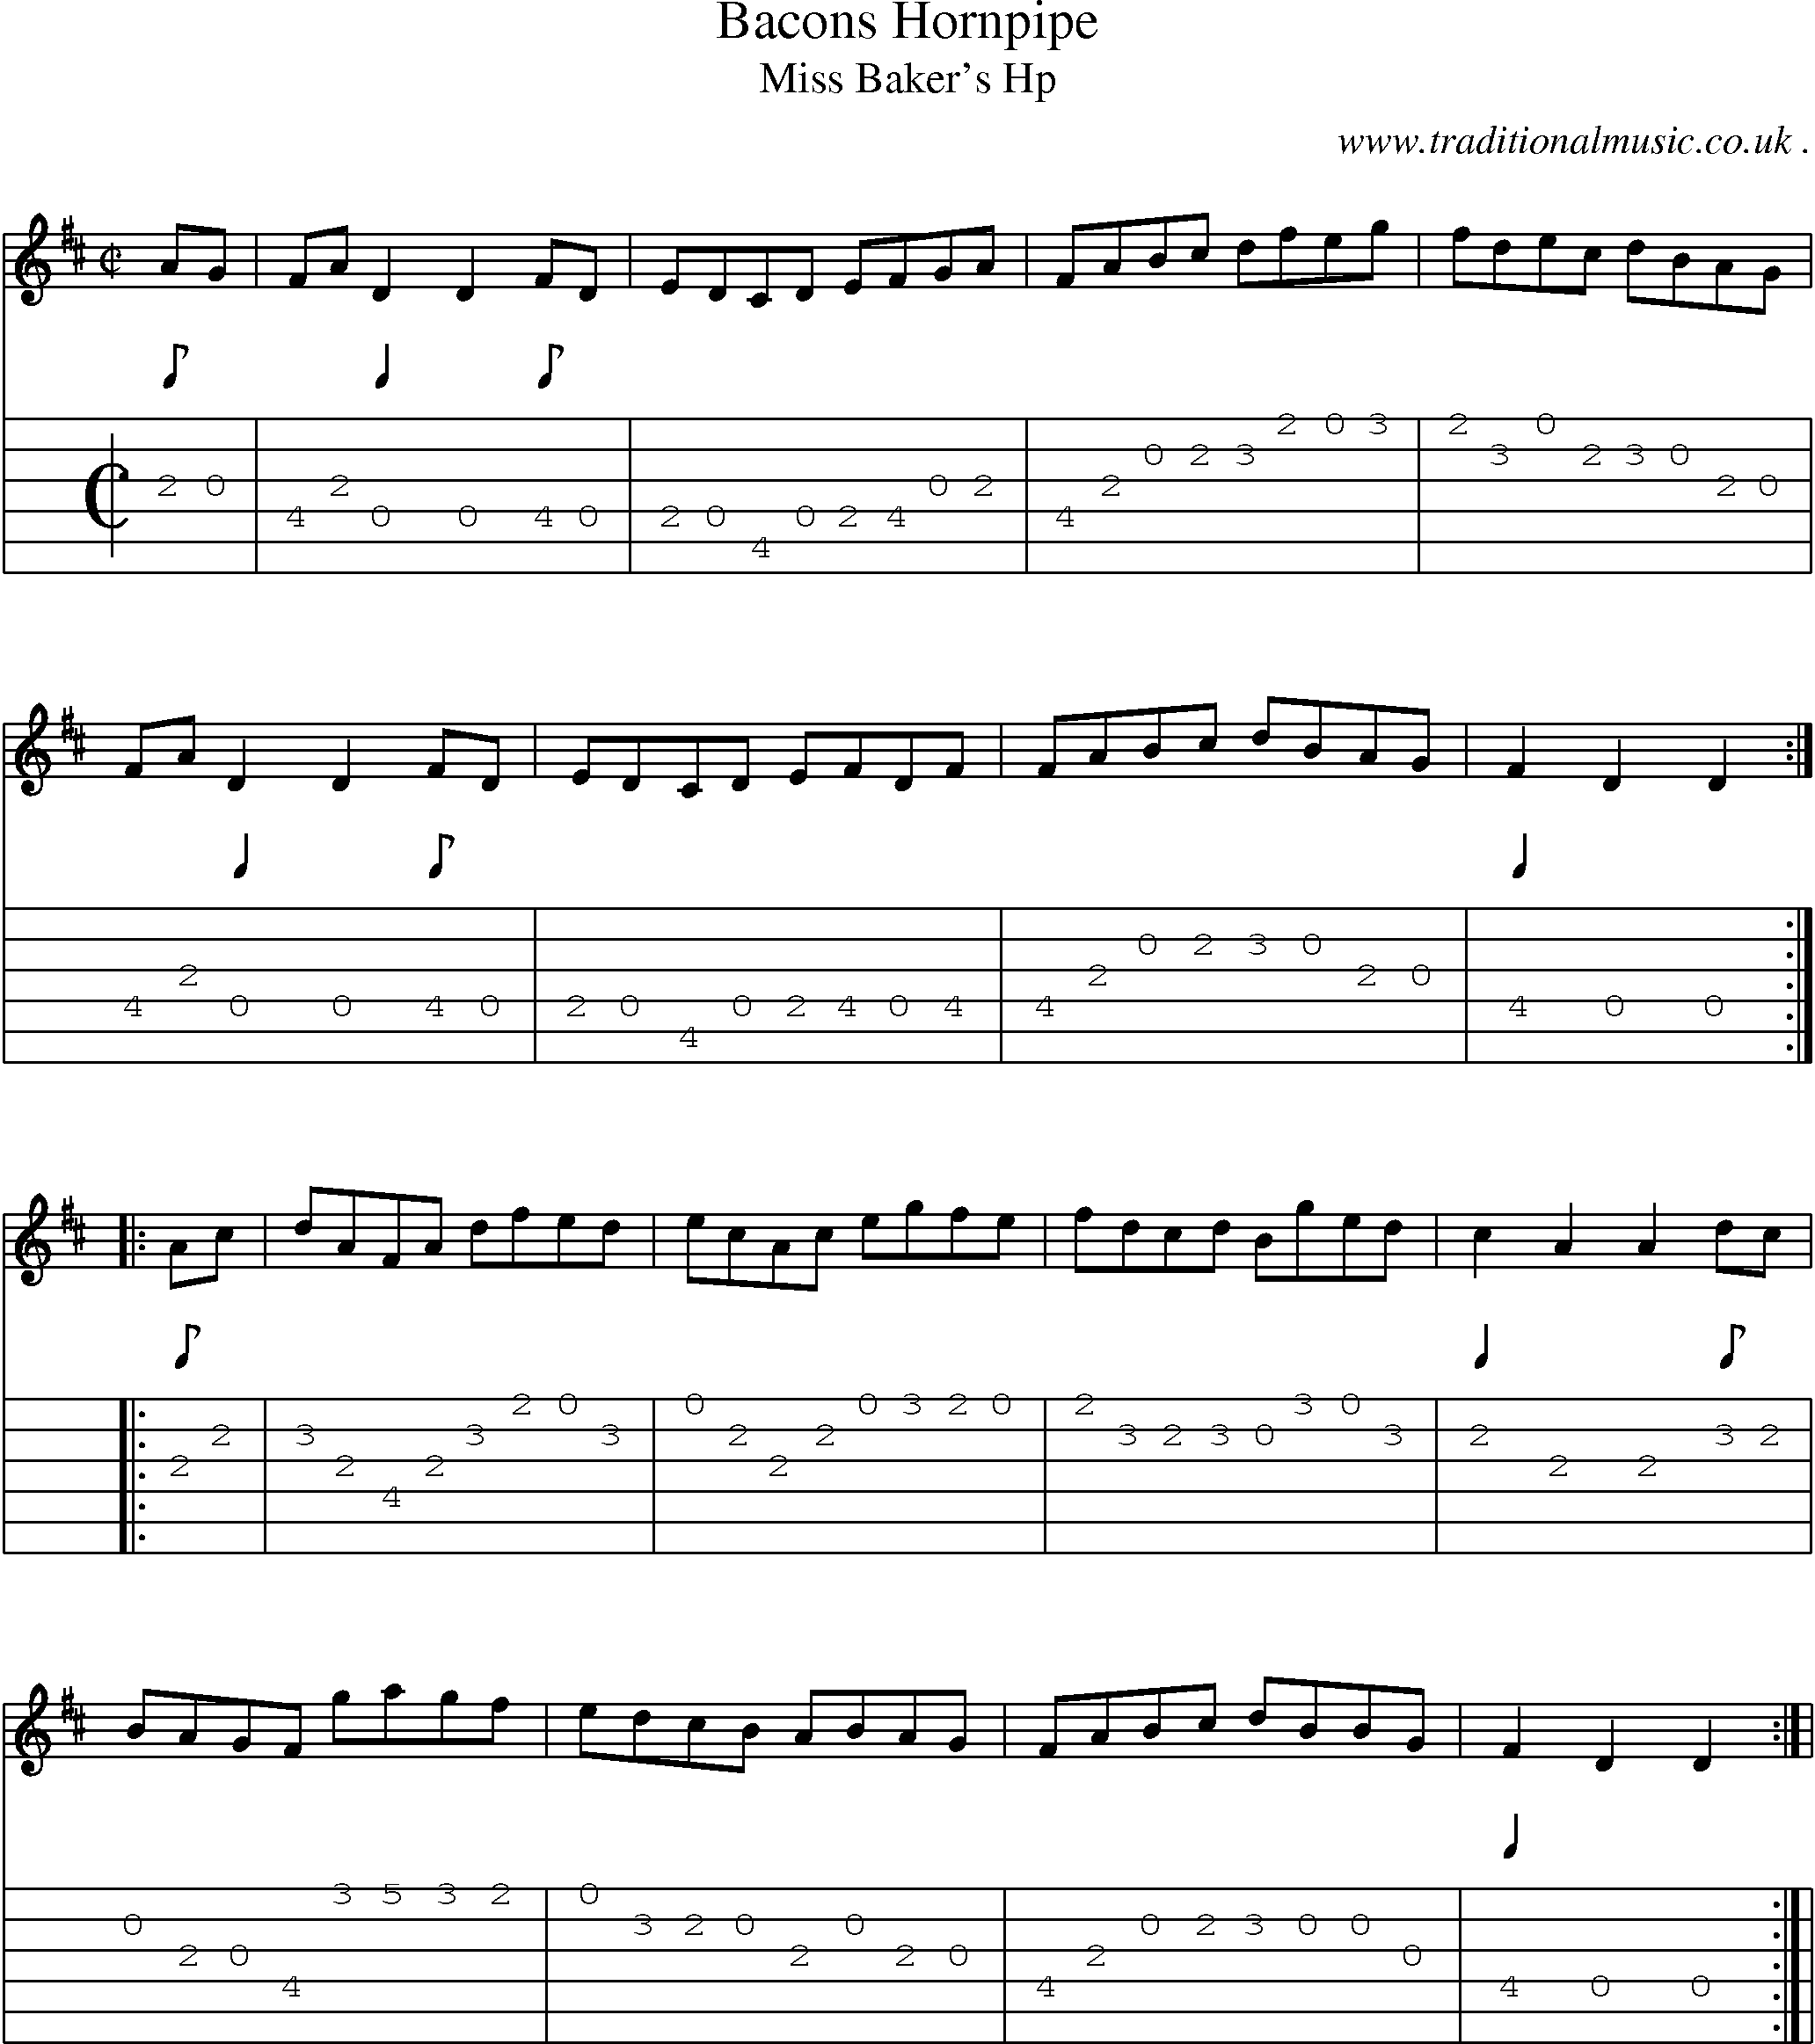 Sheet-Music and Guitar Tabs for Bacons Hornpipe